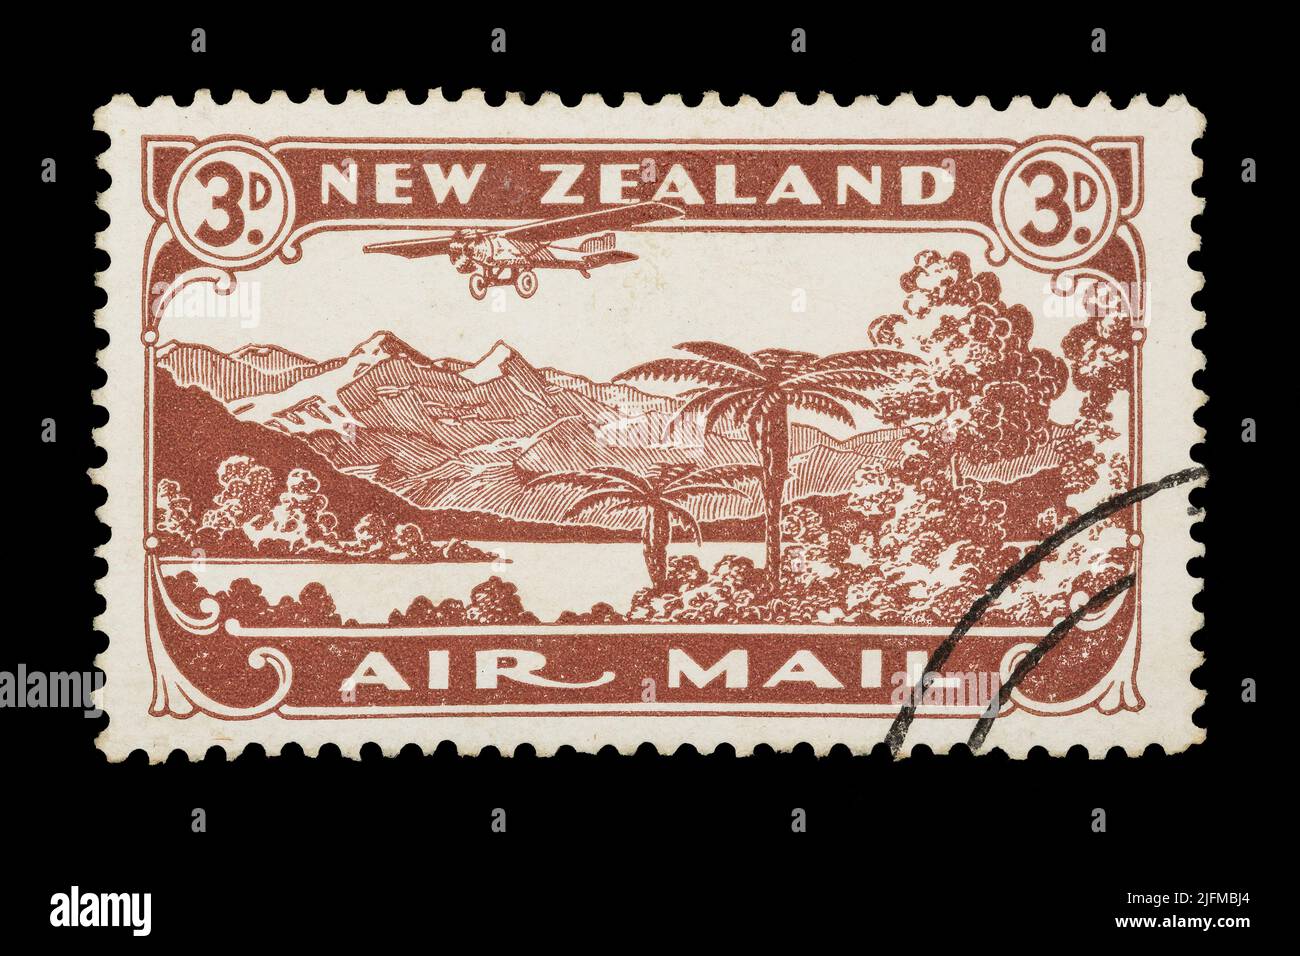 A New Zealand air mail stamp from 1931, depicting a plane flying over a New Zealand landscape Stock Photo